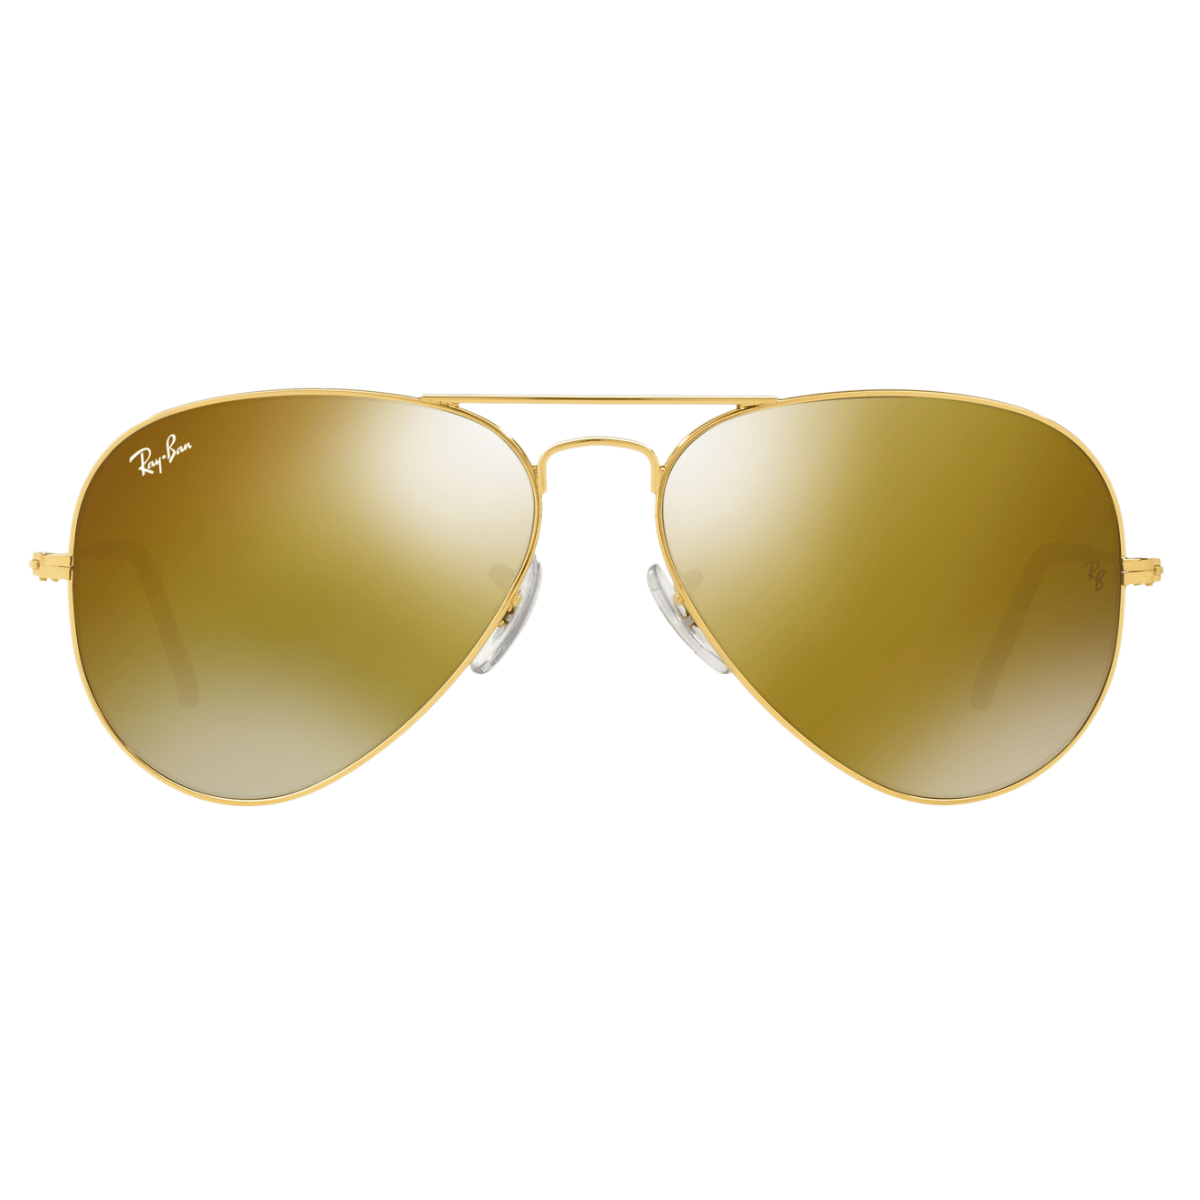 "Ray-Ban Aviator Mirror Sunglasses: Elevate your style with the RB3025I W3276 58 Gold Green Mirror Gold sunglasses for men and women. Classic pilot frame in gold with stunning green mirror gold lenses, offering both style and glare protection."